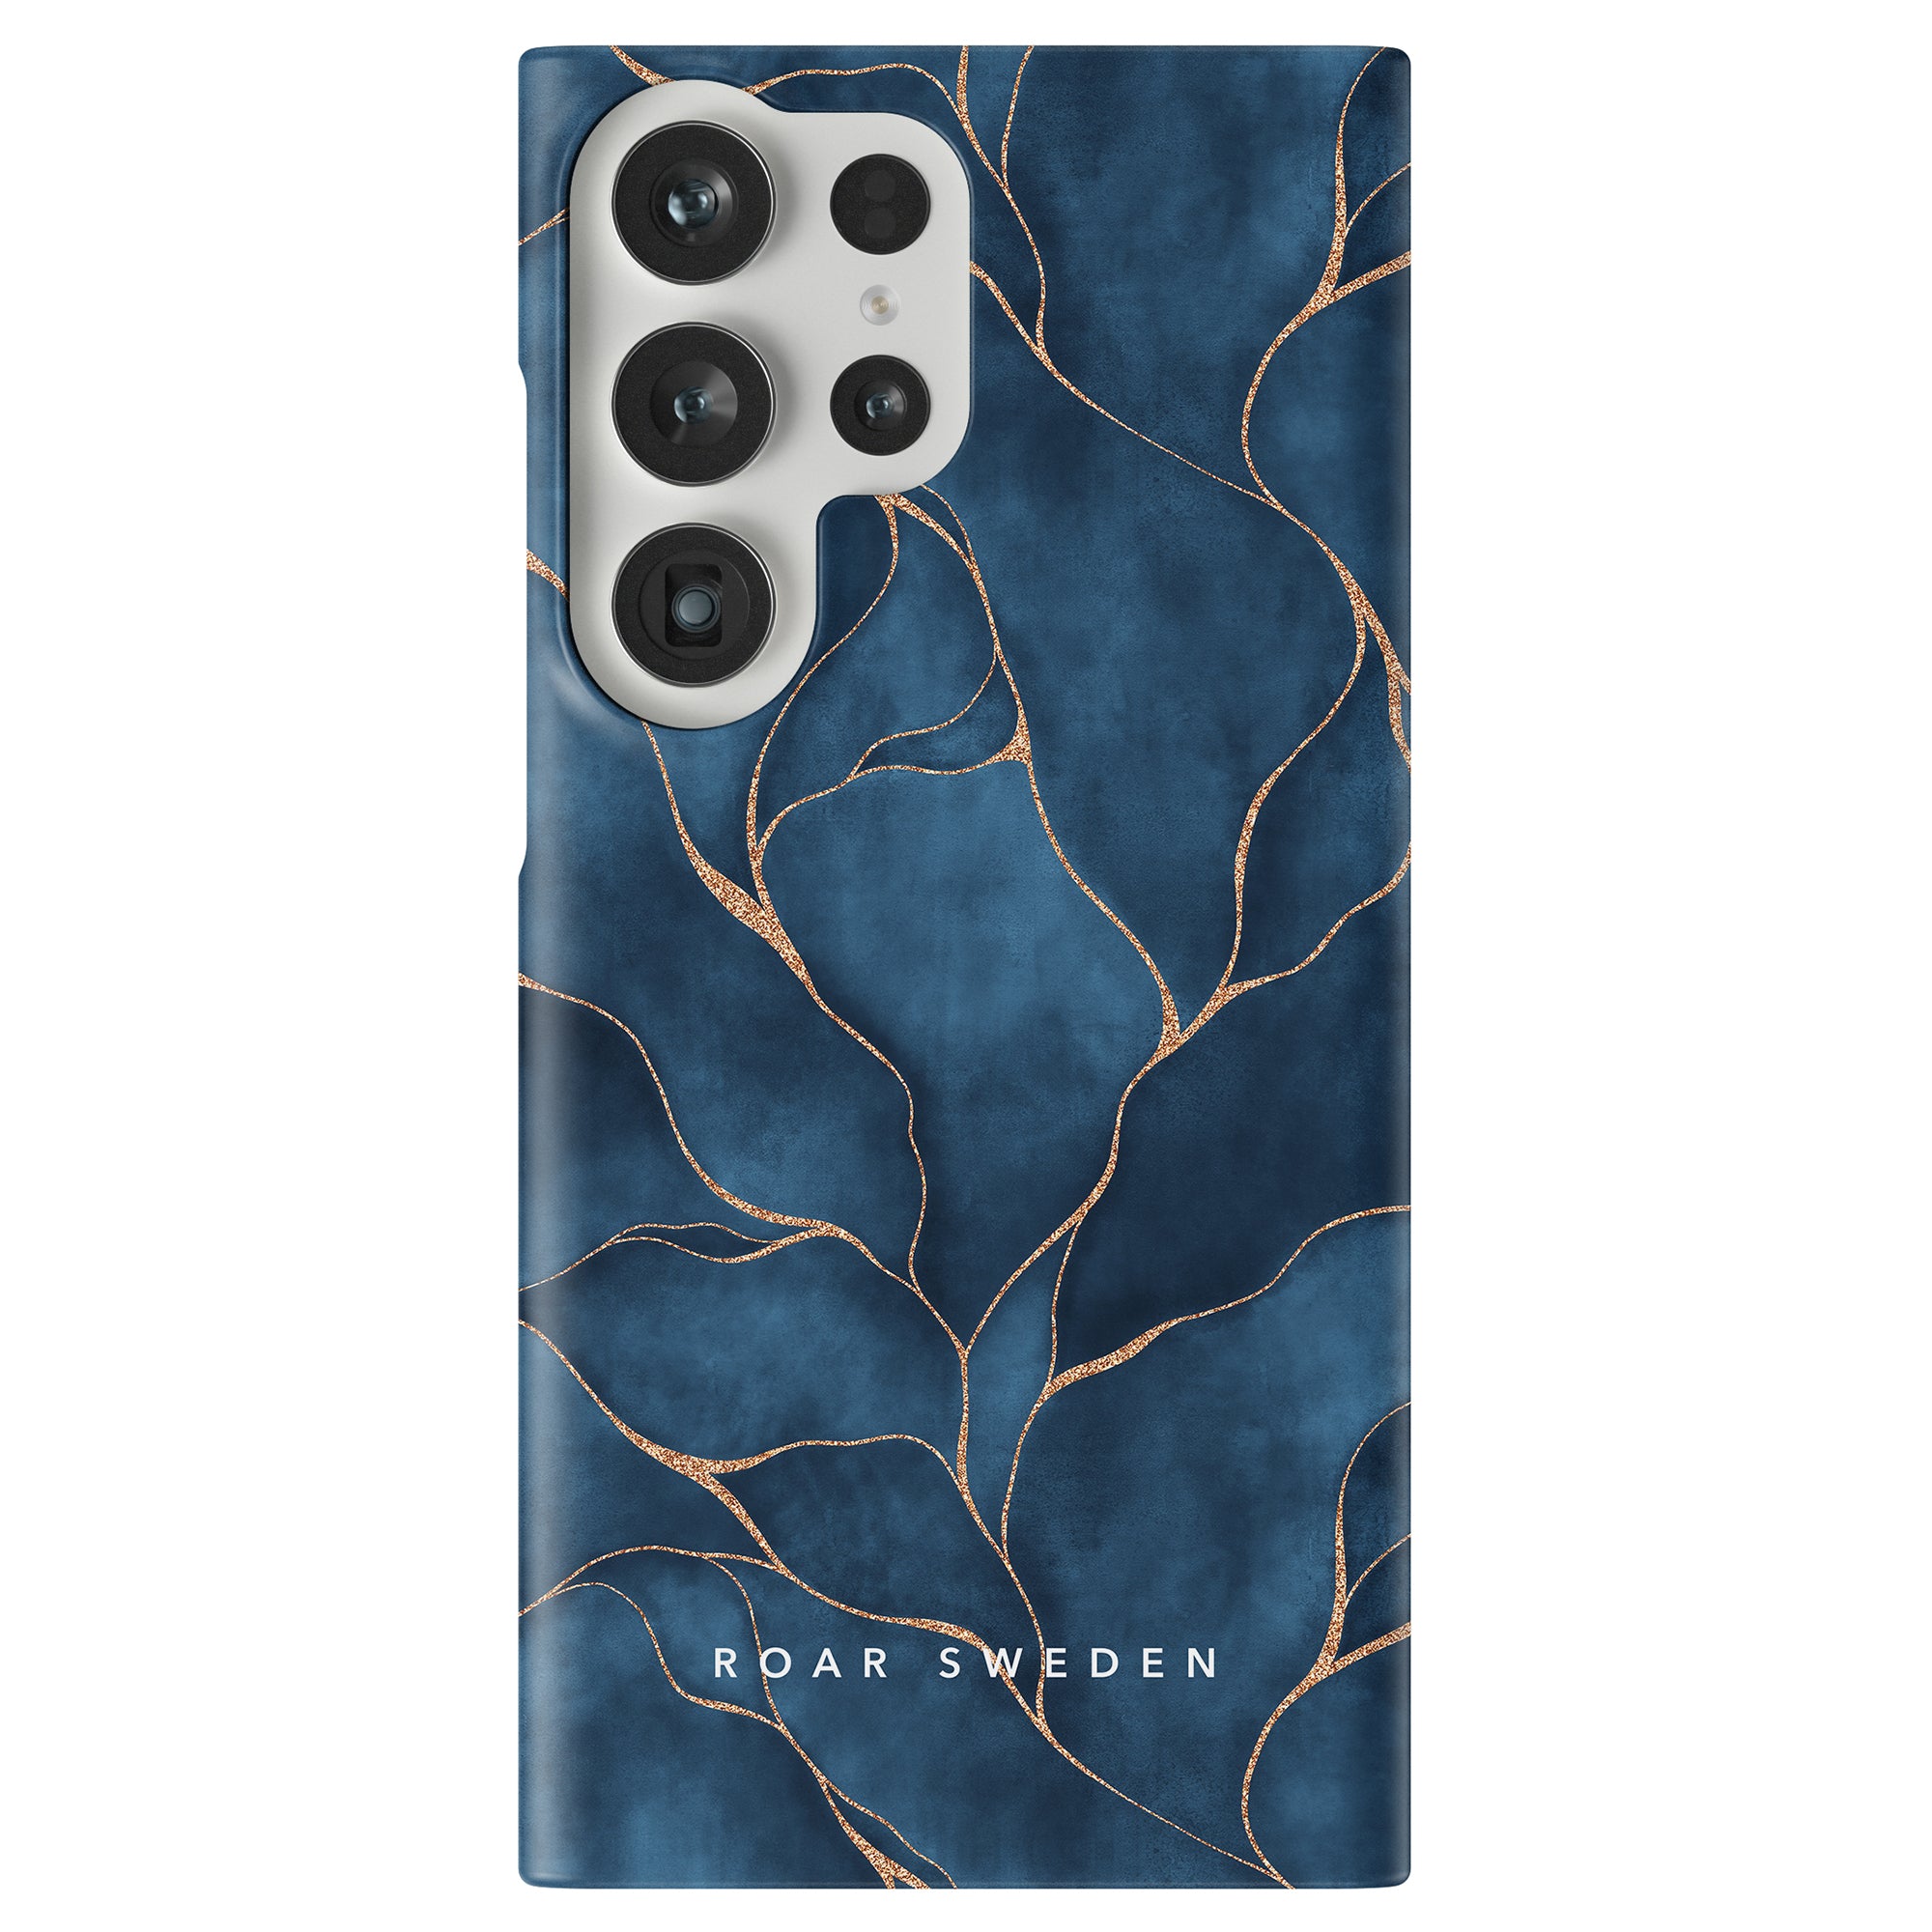 A Yggdrasil - Slim case with blue and gold leaves inspired by Yggdrasil.